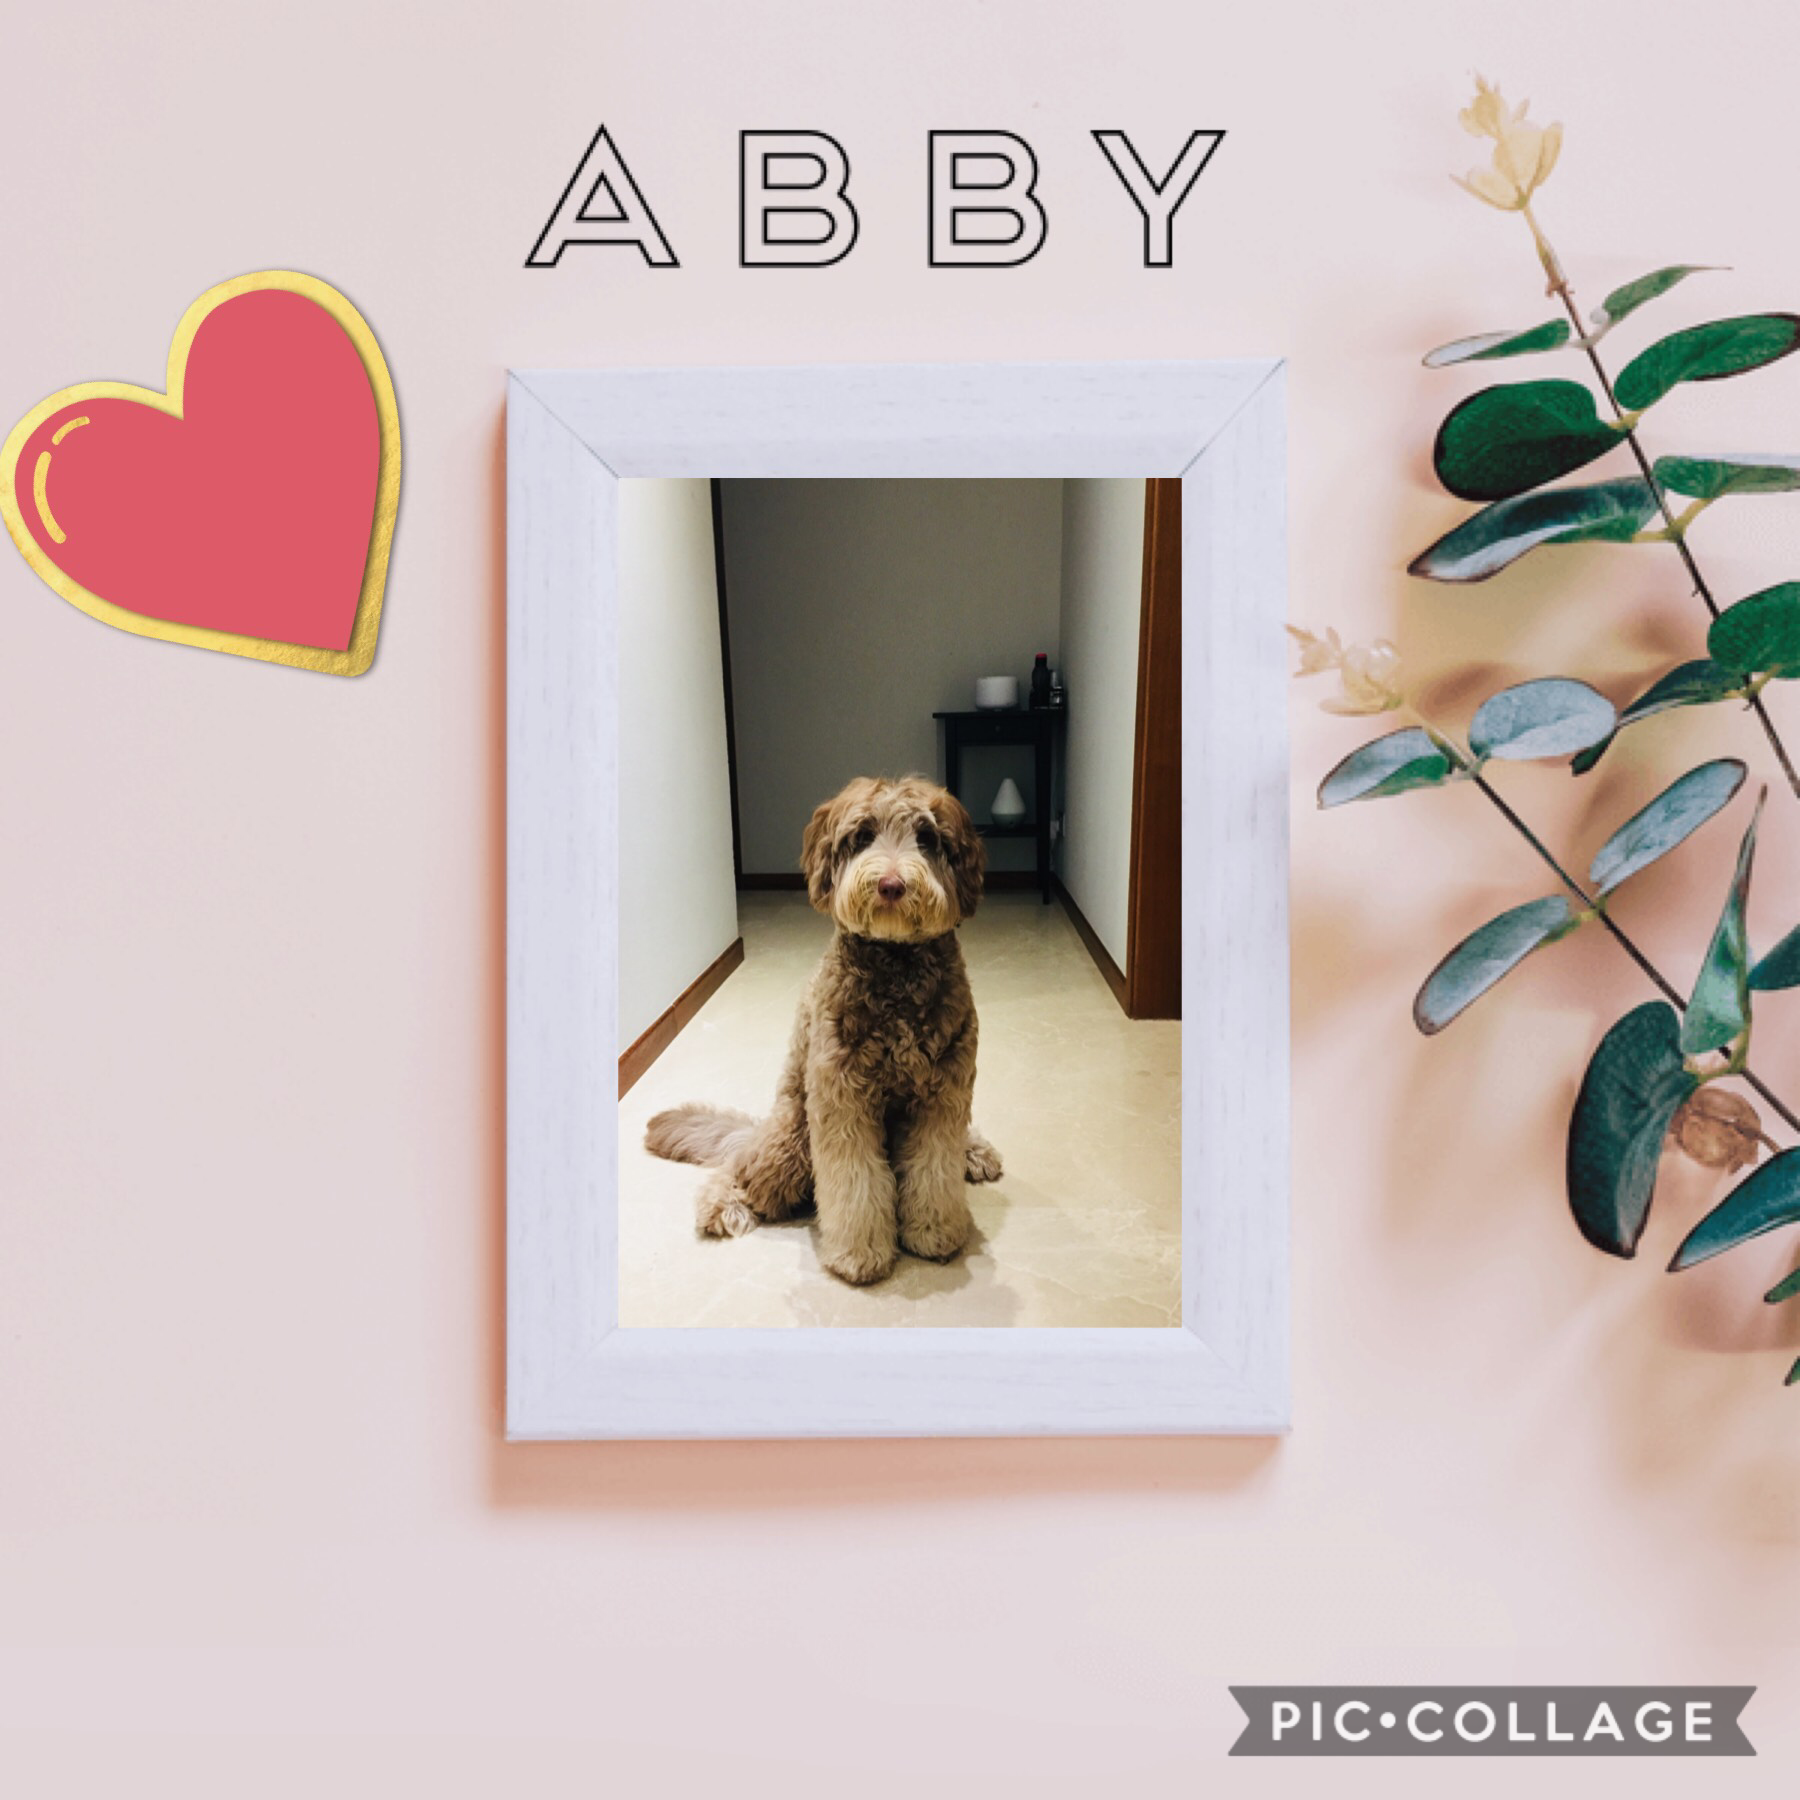 Let’s see how many likes we can get with cute Abby!